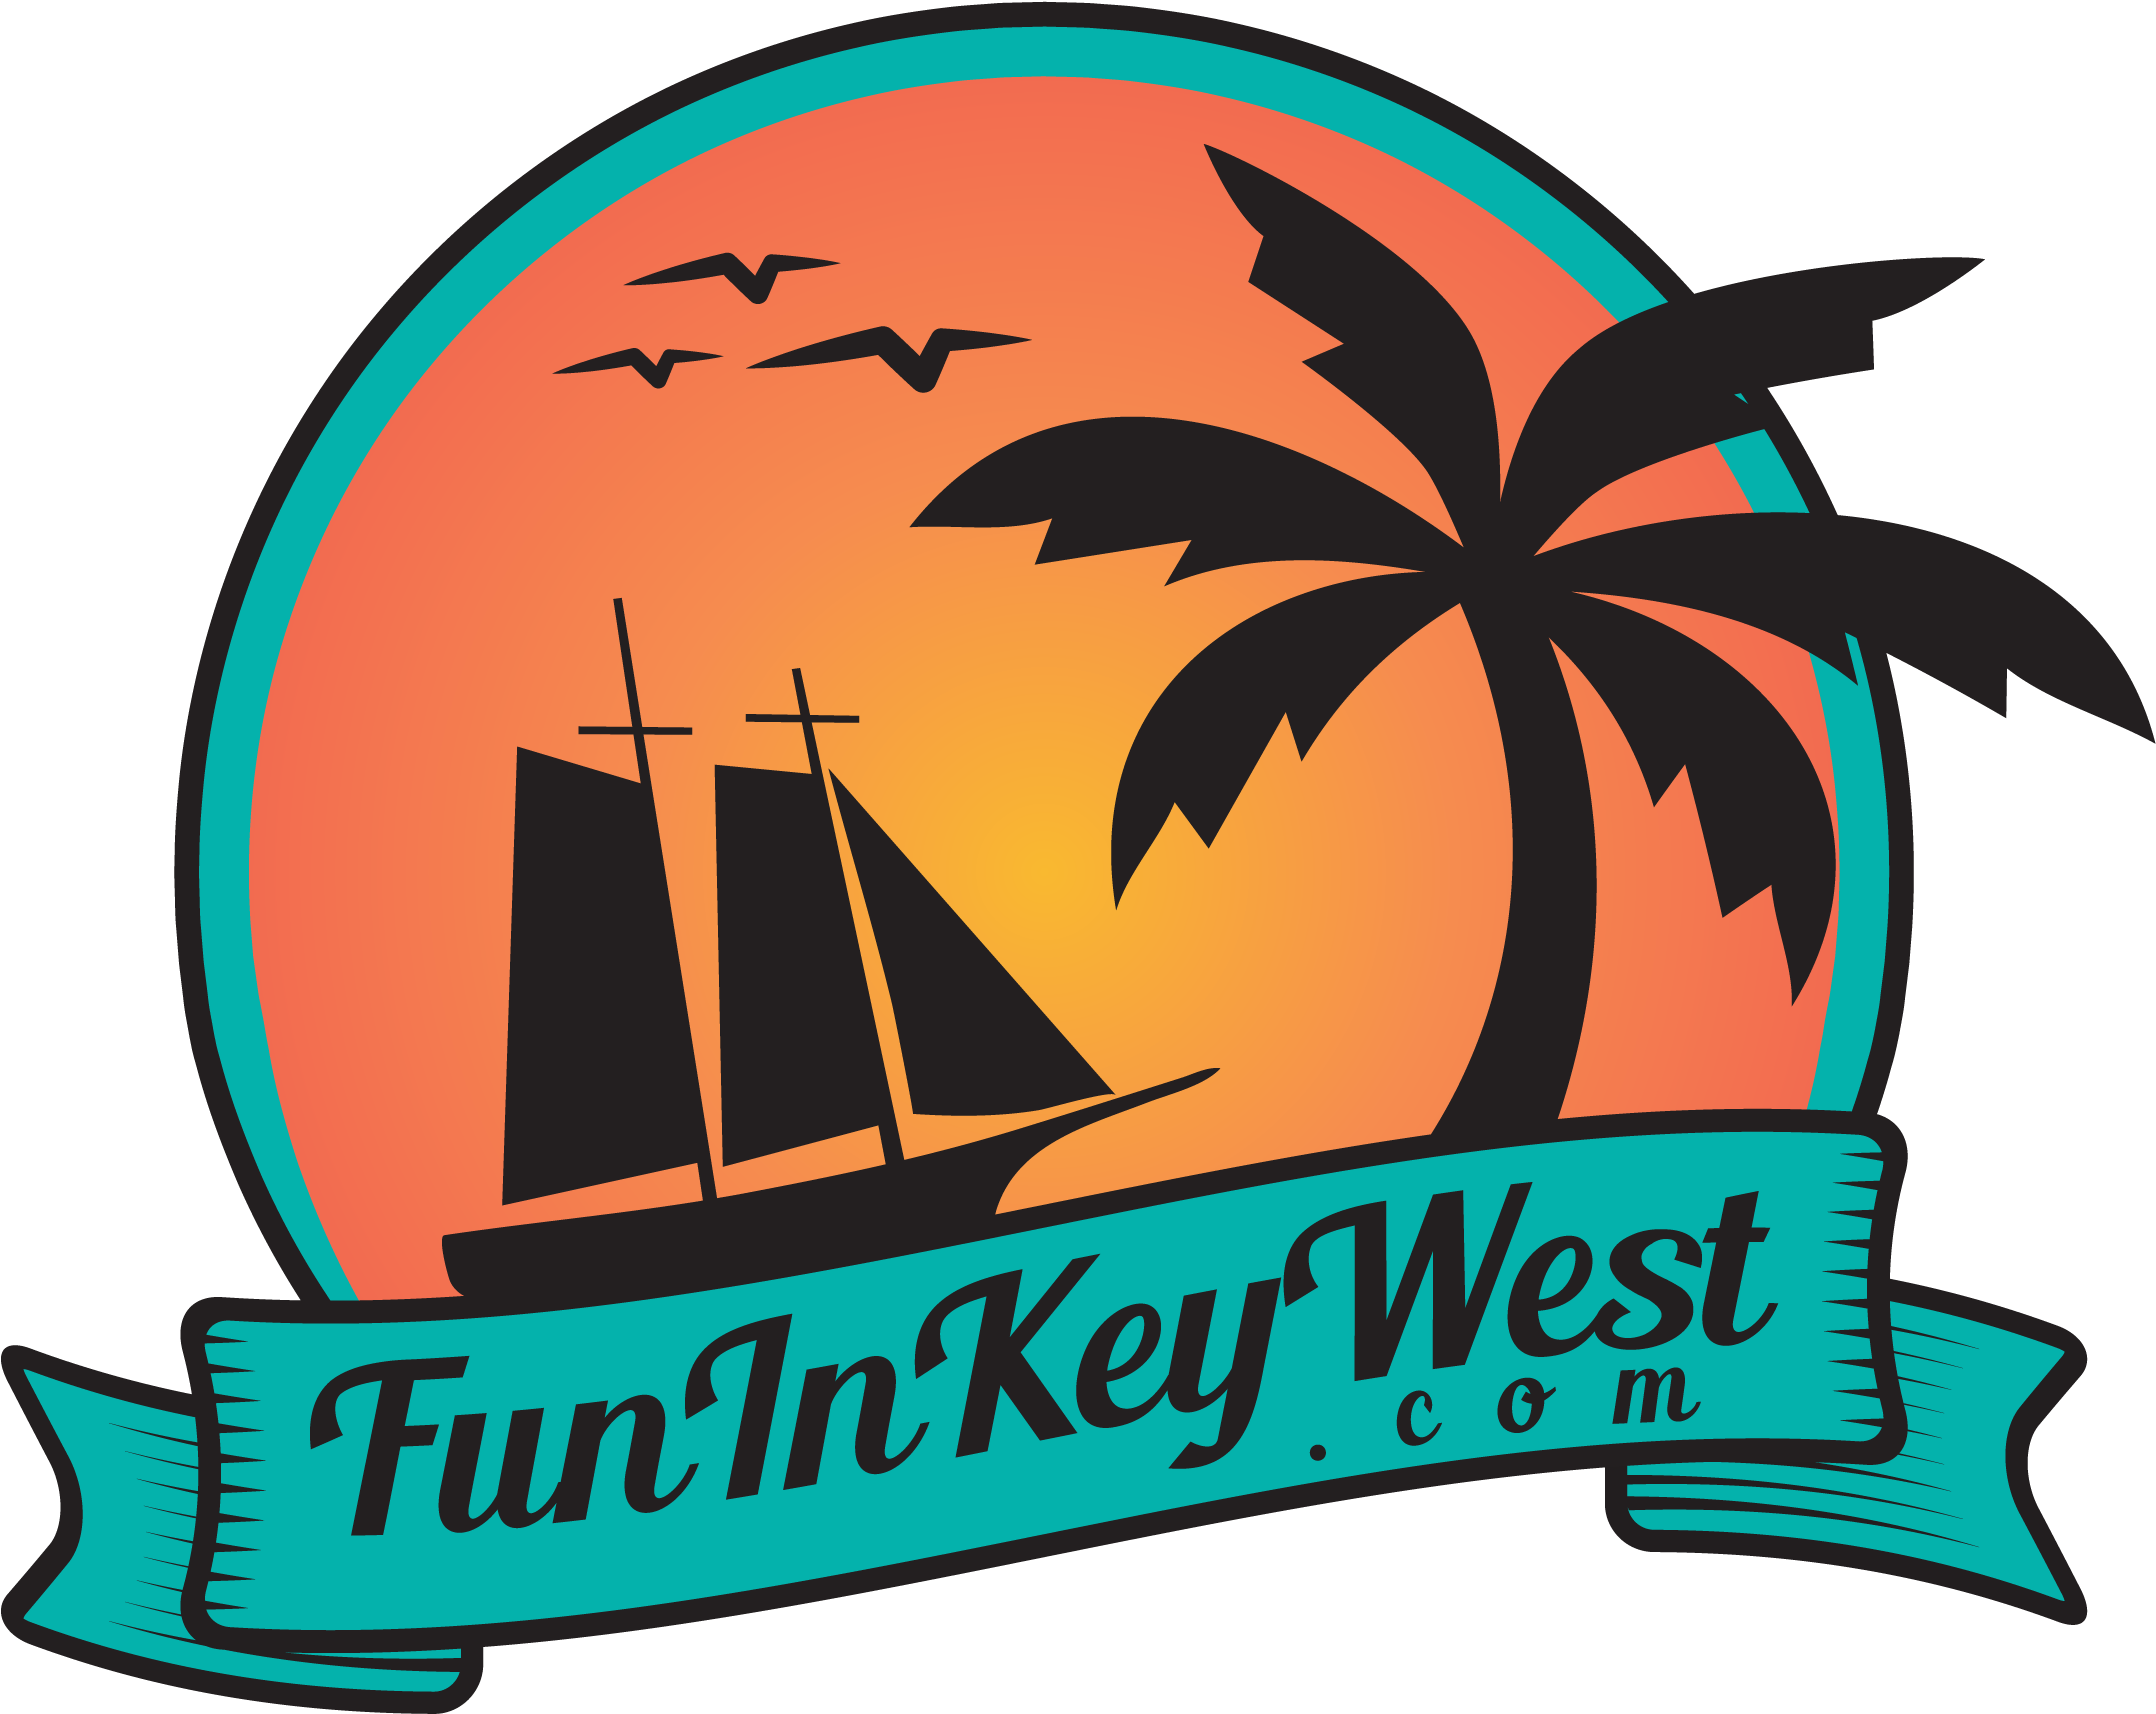 A Logo With A Sailboat And Palm Tree